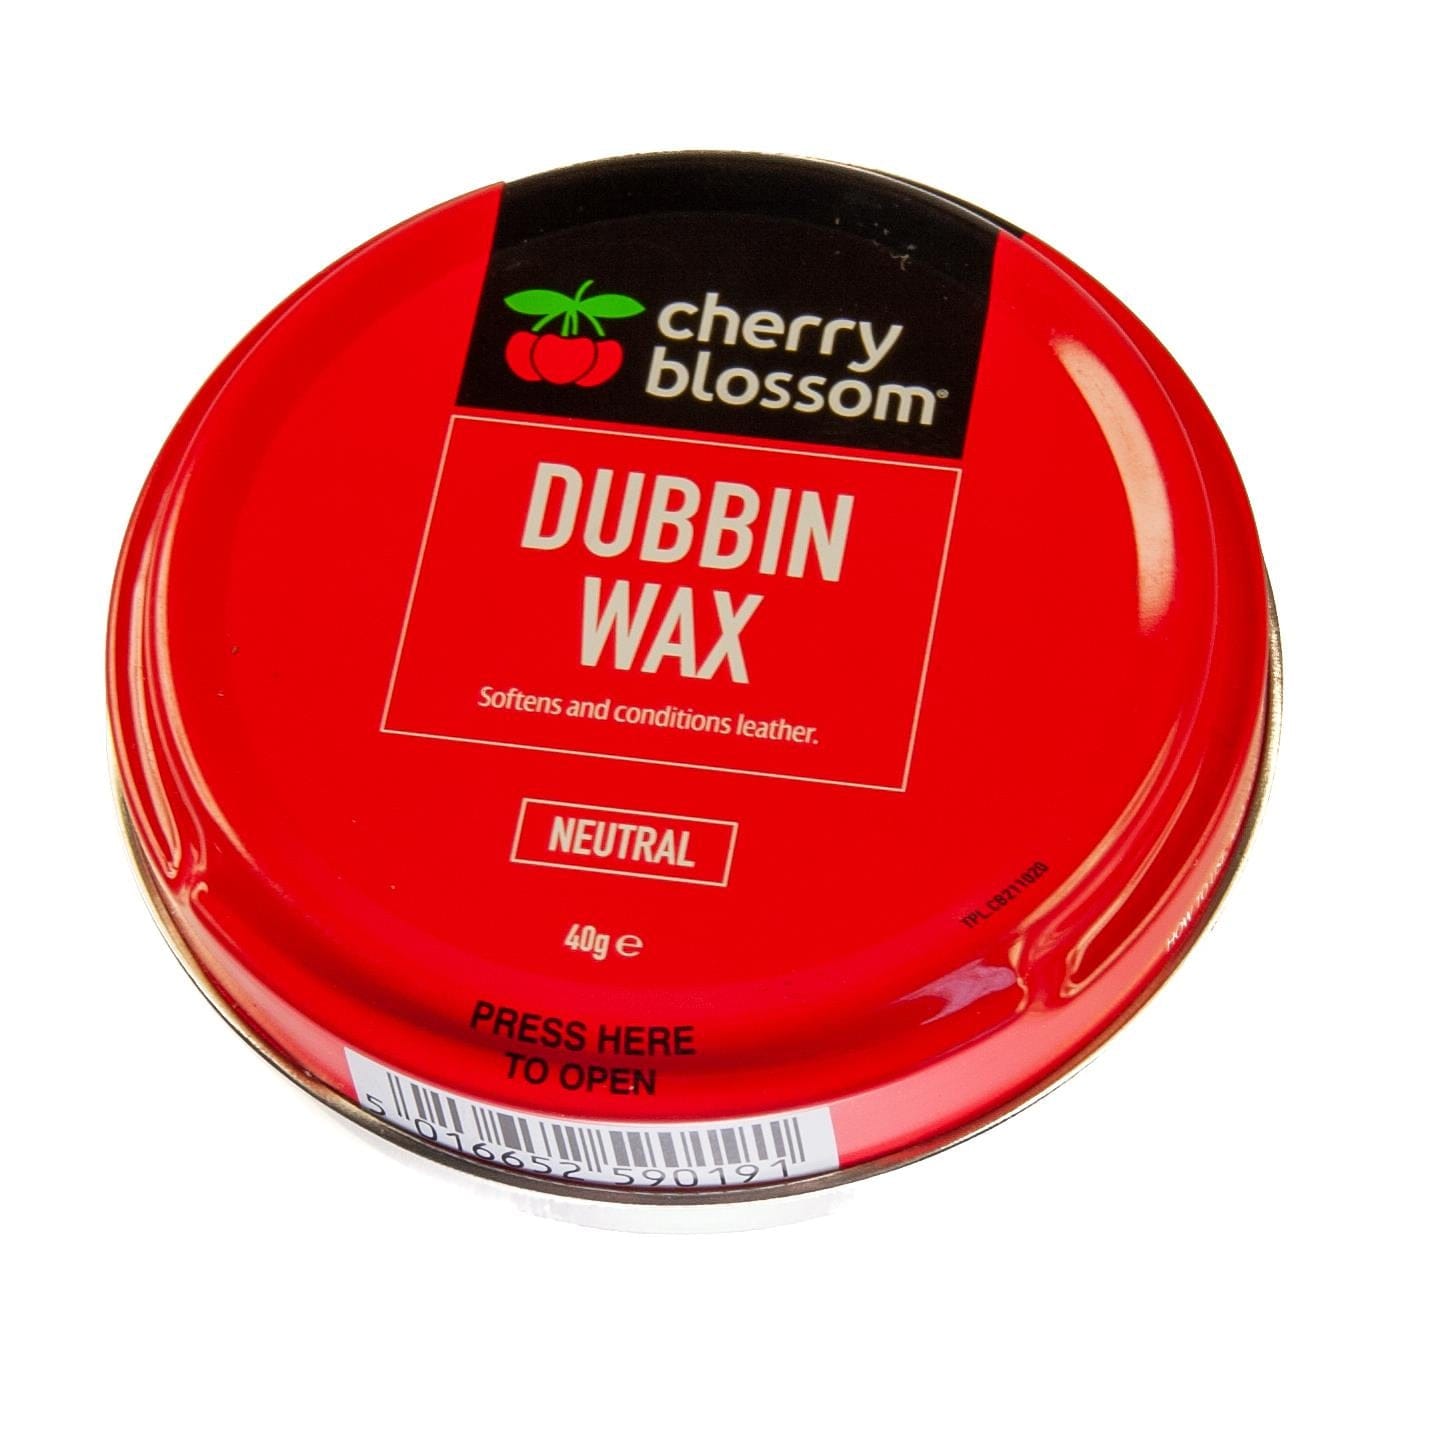 Dubbin Neutral 50ml Tin Waterproofs Protect Leather Shoe & Boot Wax | Cherry Blossom Service Item Cherry Blossom 901515